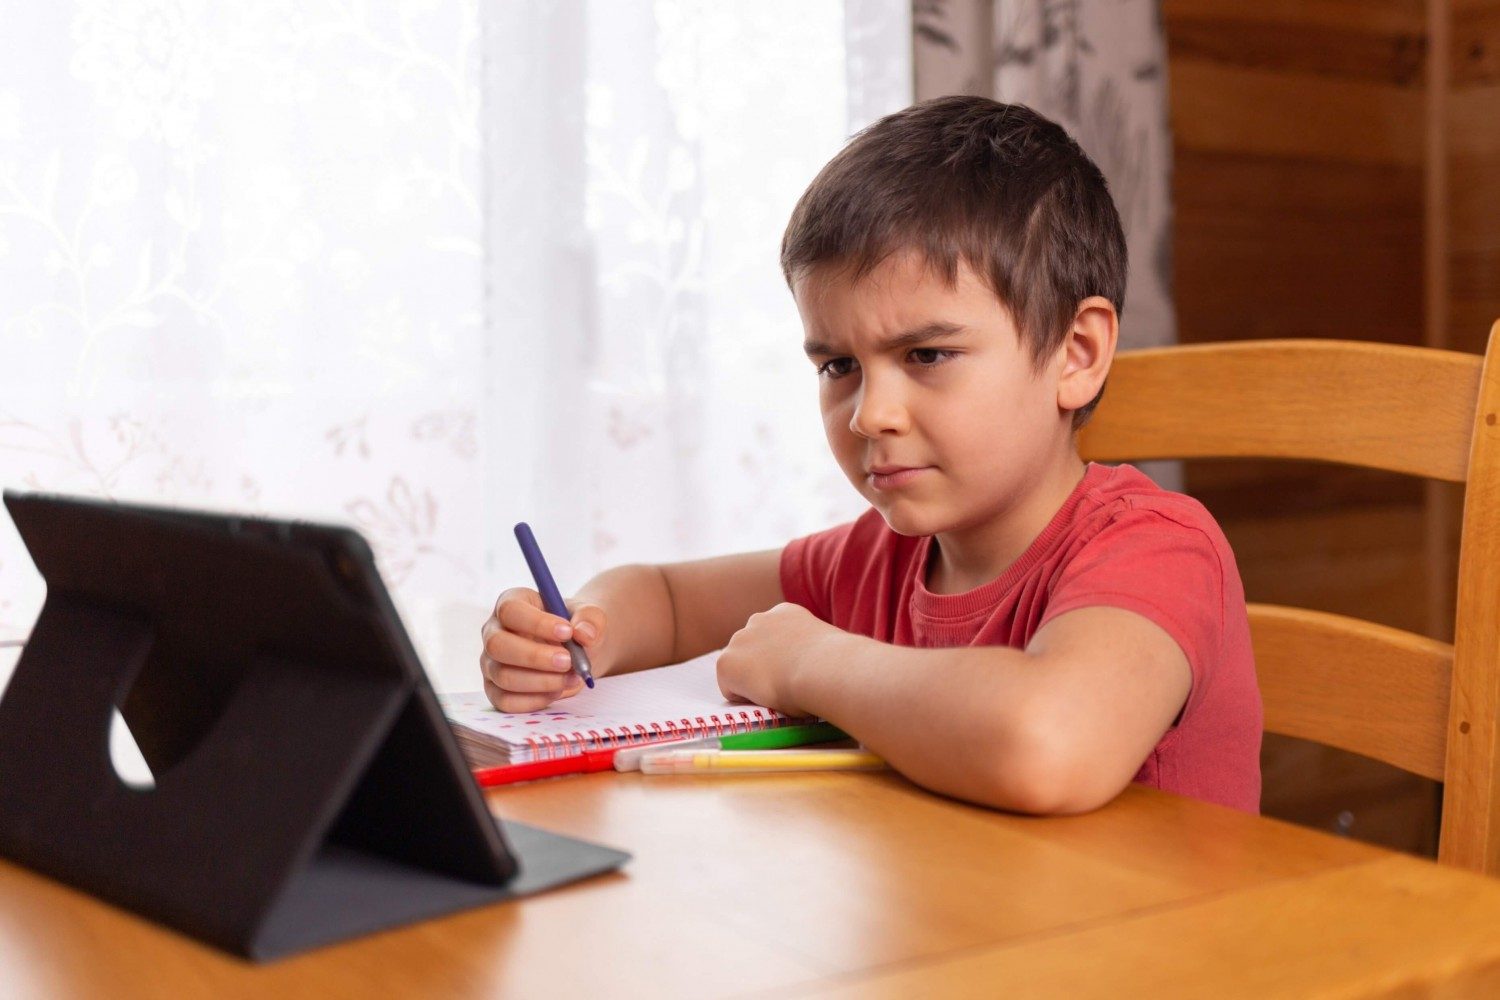 How can families cope when they can't get through to online learning?